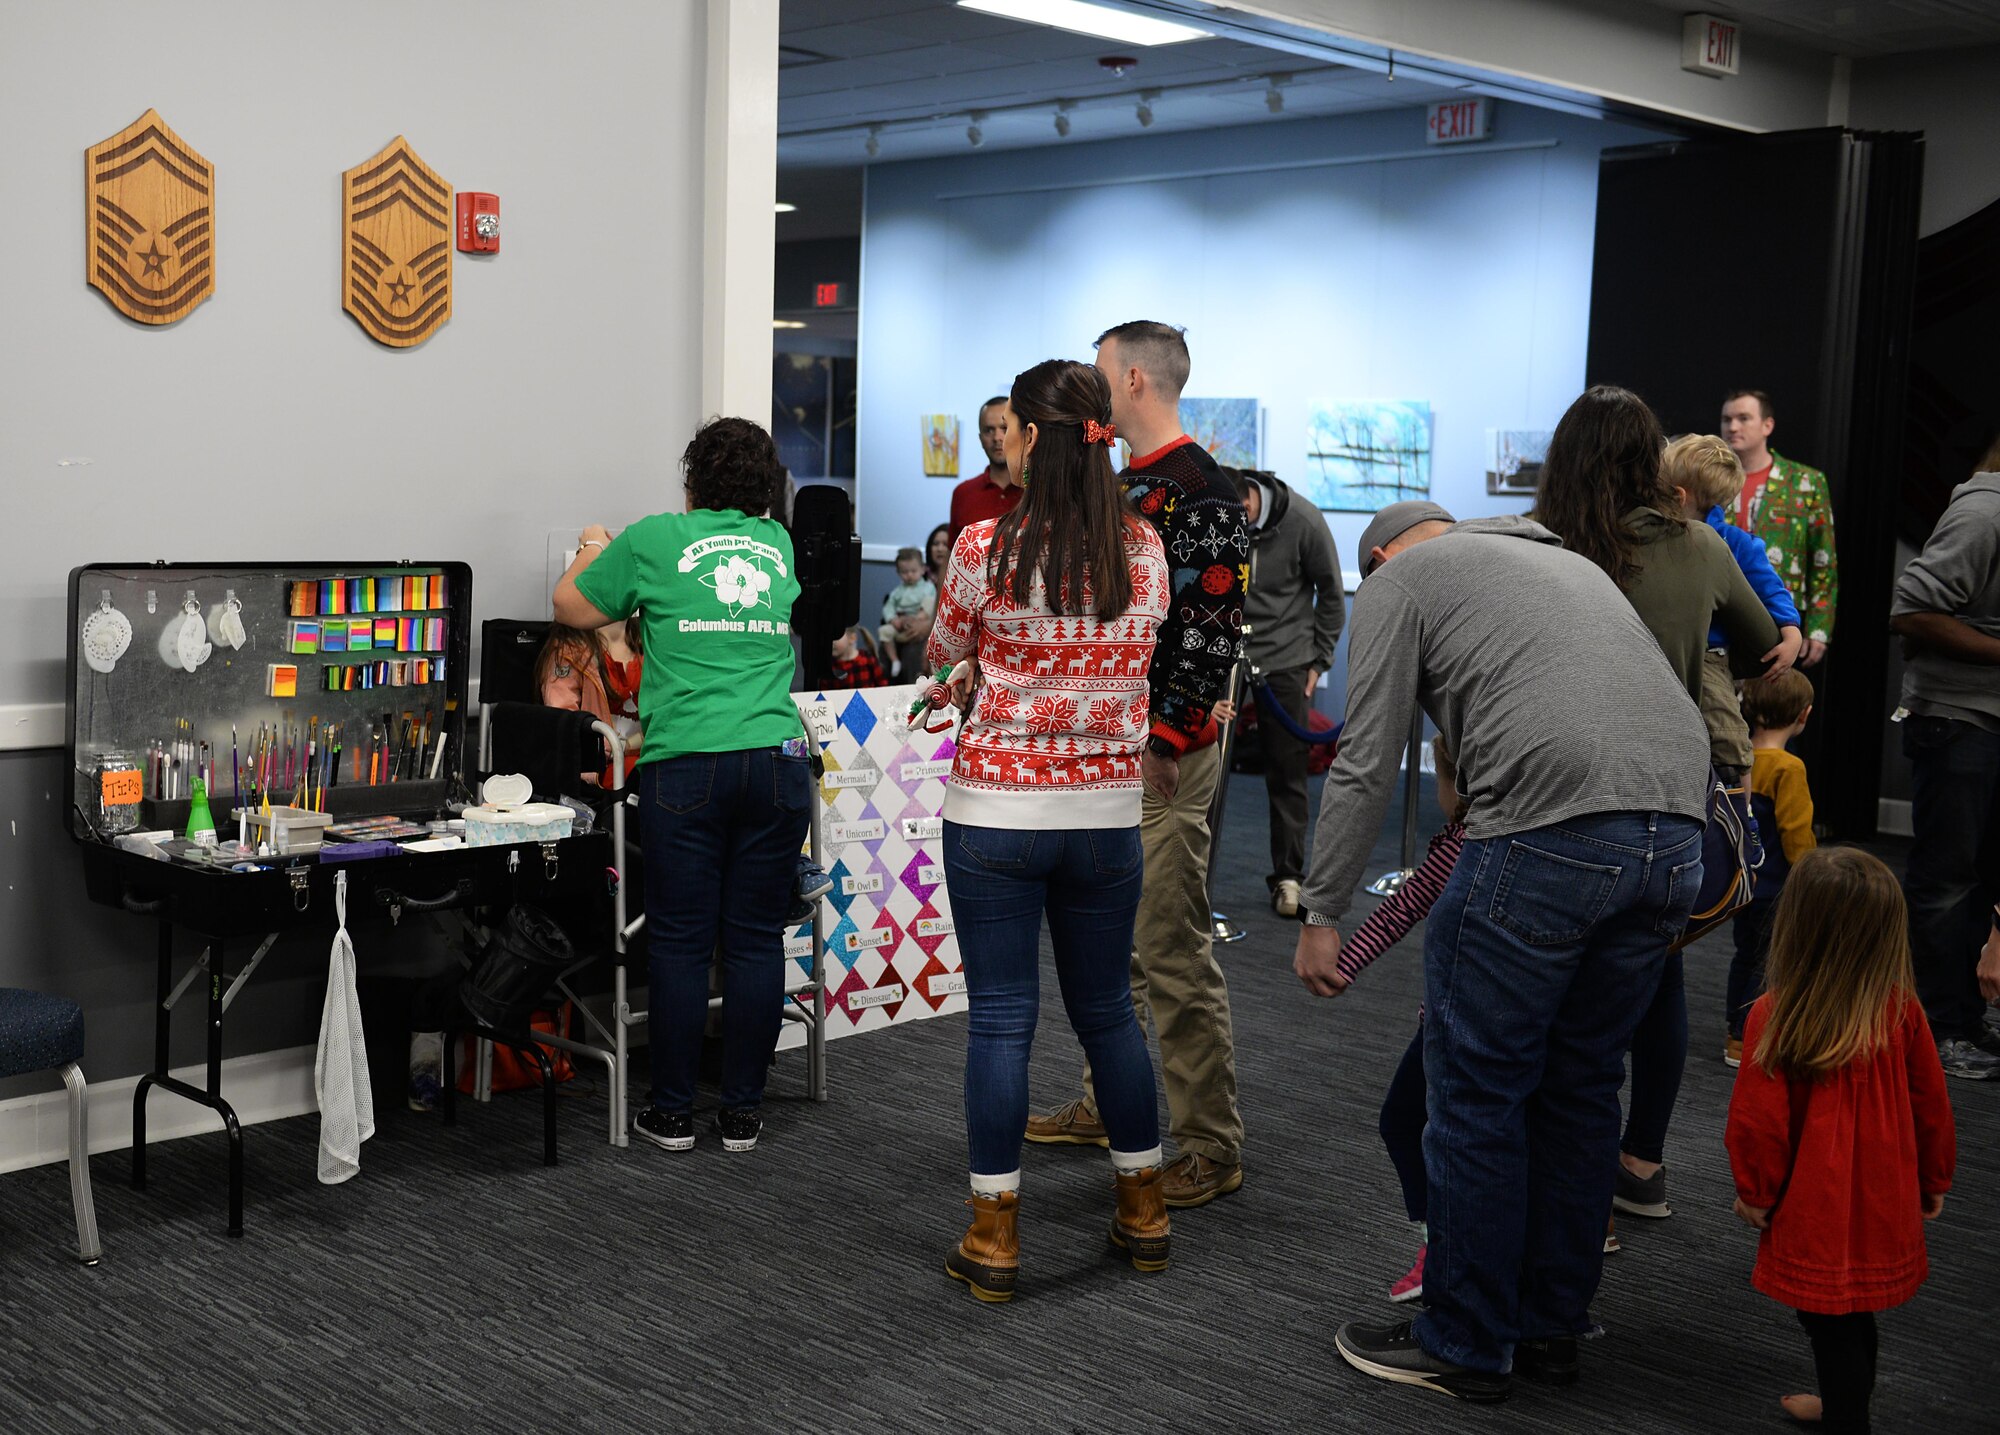 Families wait in line for face painting during Breakfast with Santa in the Columbus Club Dec. 14, 2019, on Columbus Air Force Base, Miss. A variety of options were available to choose from, including mermaid, ice princess, dragon, and so many more. (U.S. Air Force photo by Airman 1st Class Hannah Bean)